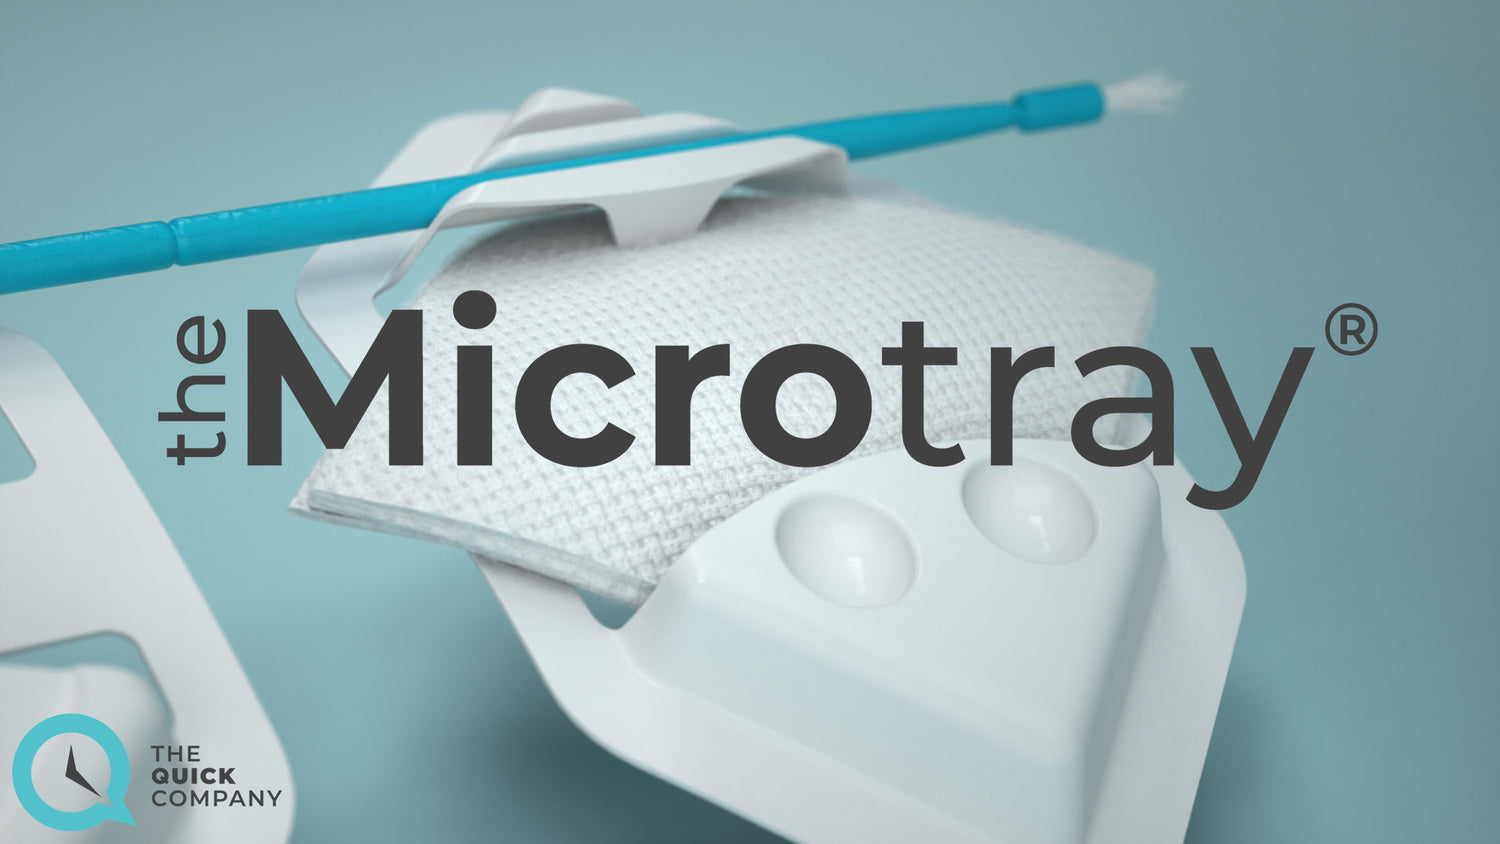 The Microtray product demonstration